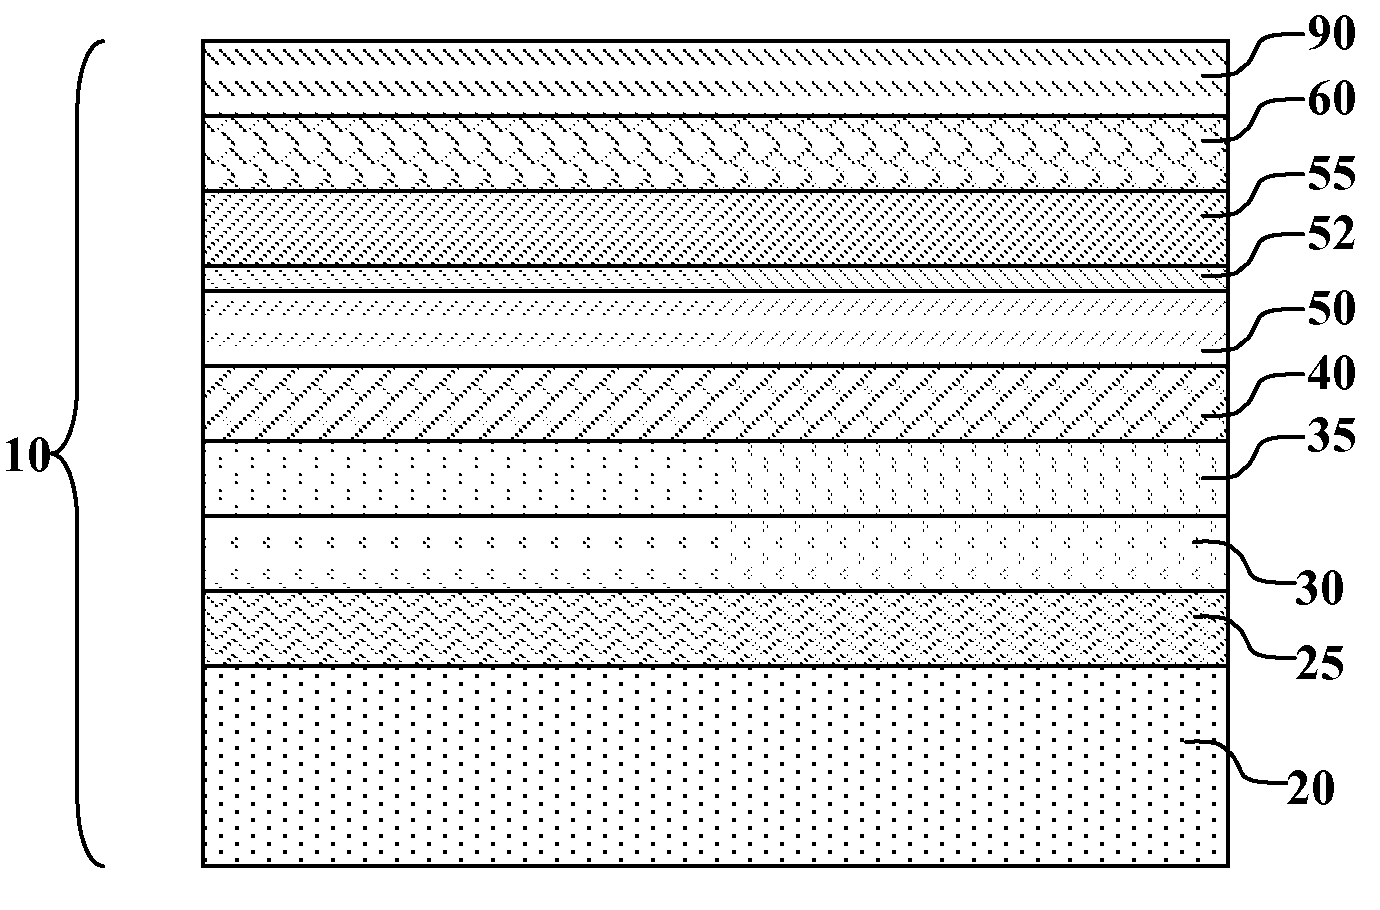 Dual electron-transporting layer for OLED device